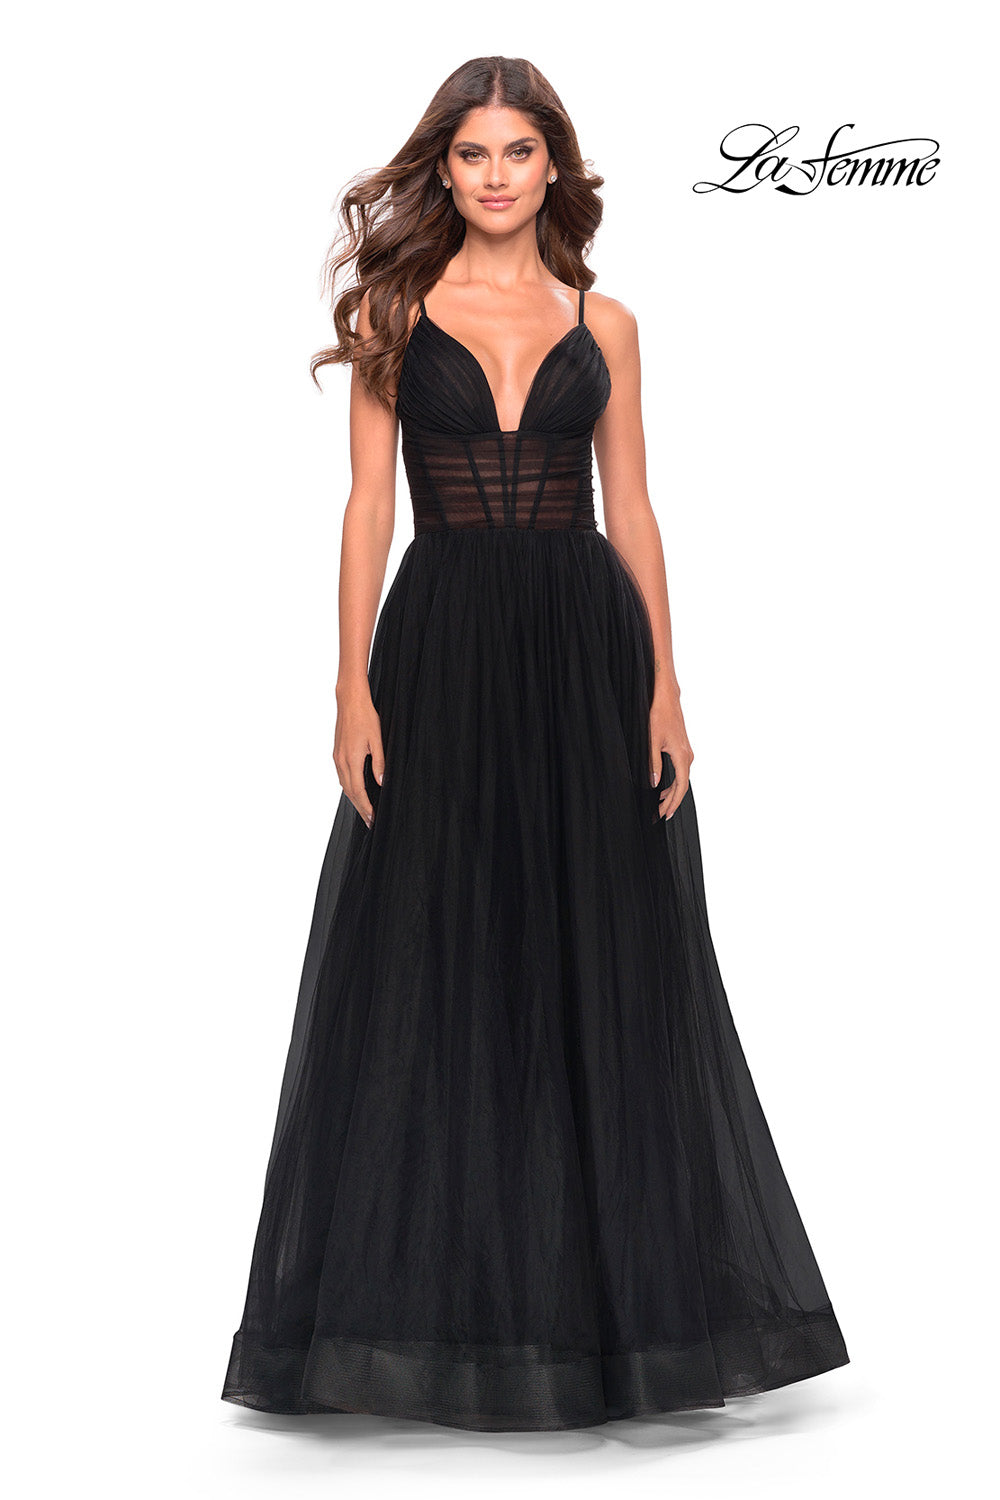 La Femme 31147 prom dress images.  La Femme 31147 is available in these colors: Black, Red, Royal Blue.